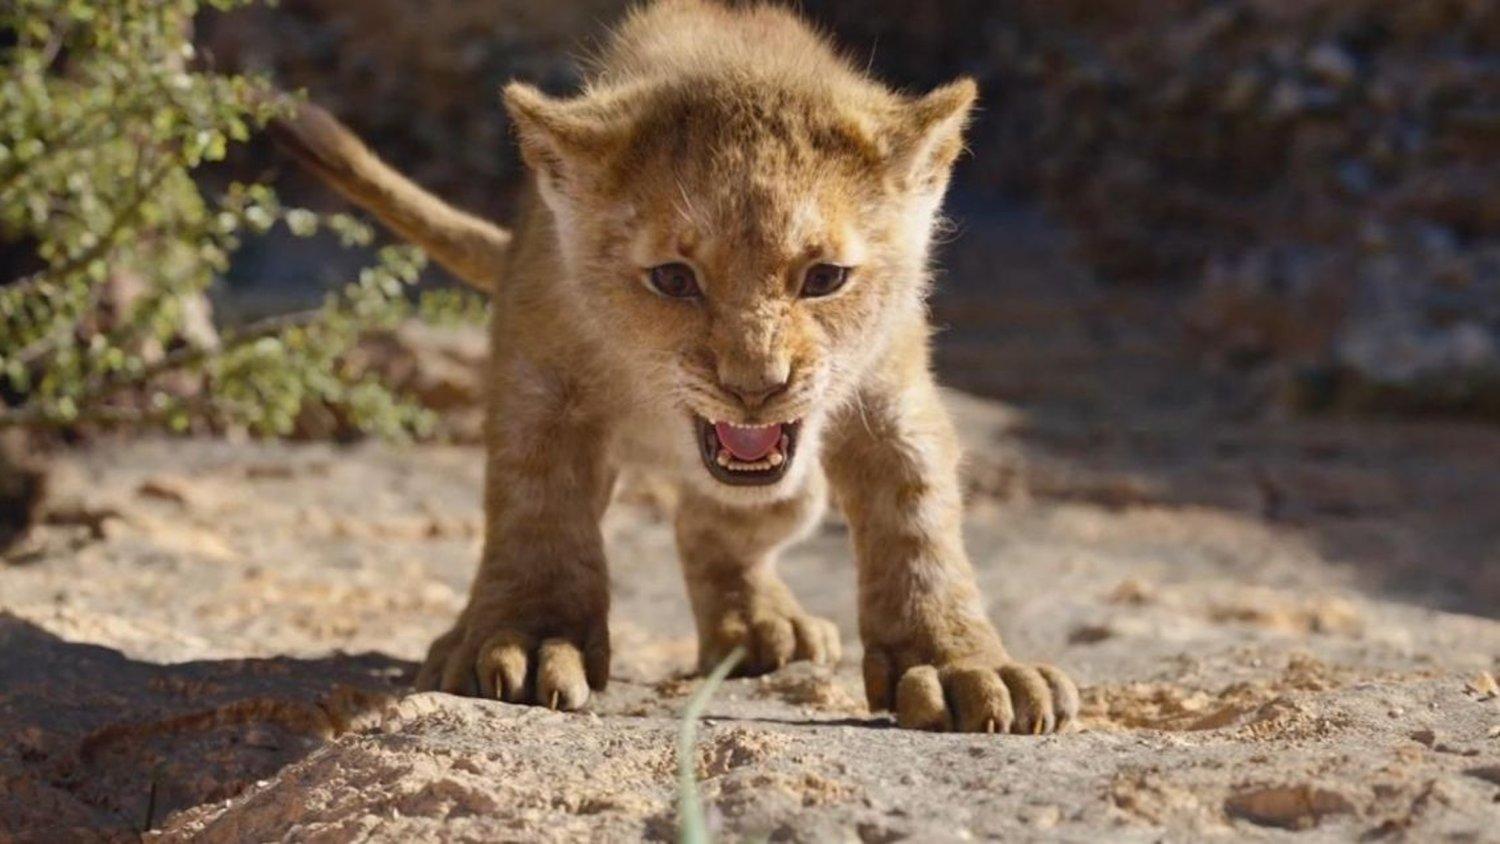 New Clips For THE LION KING Include Circle of Life, Find